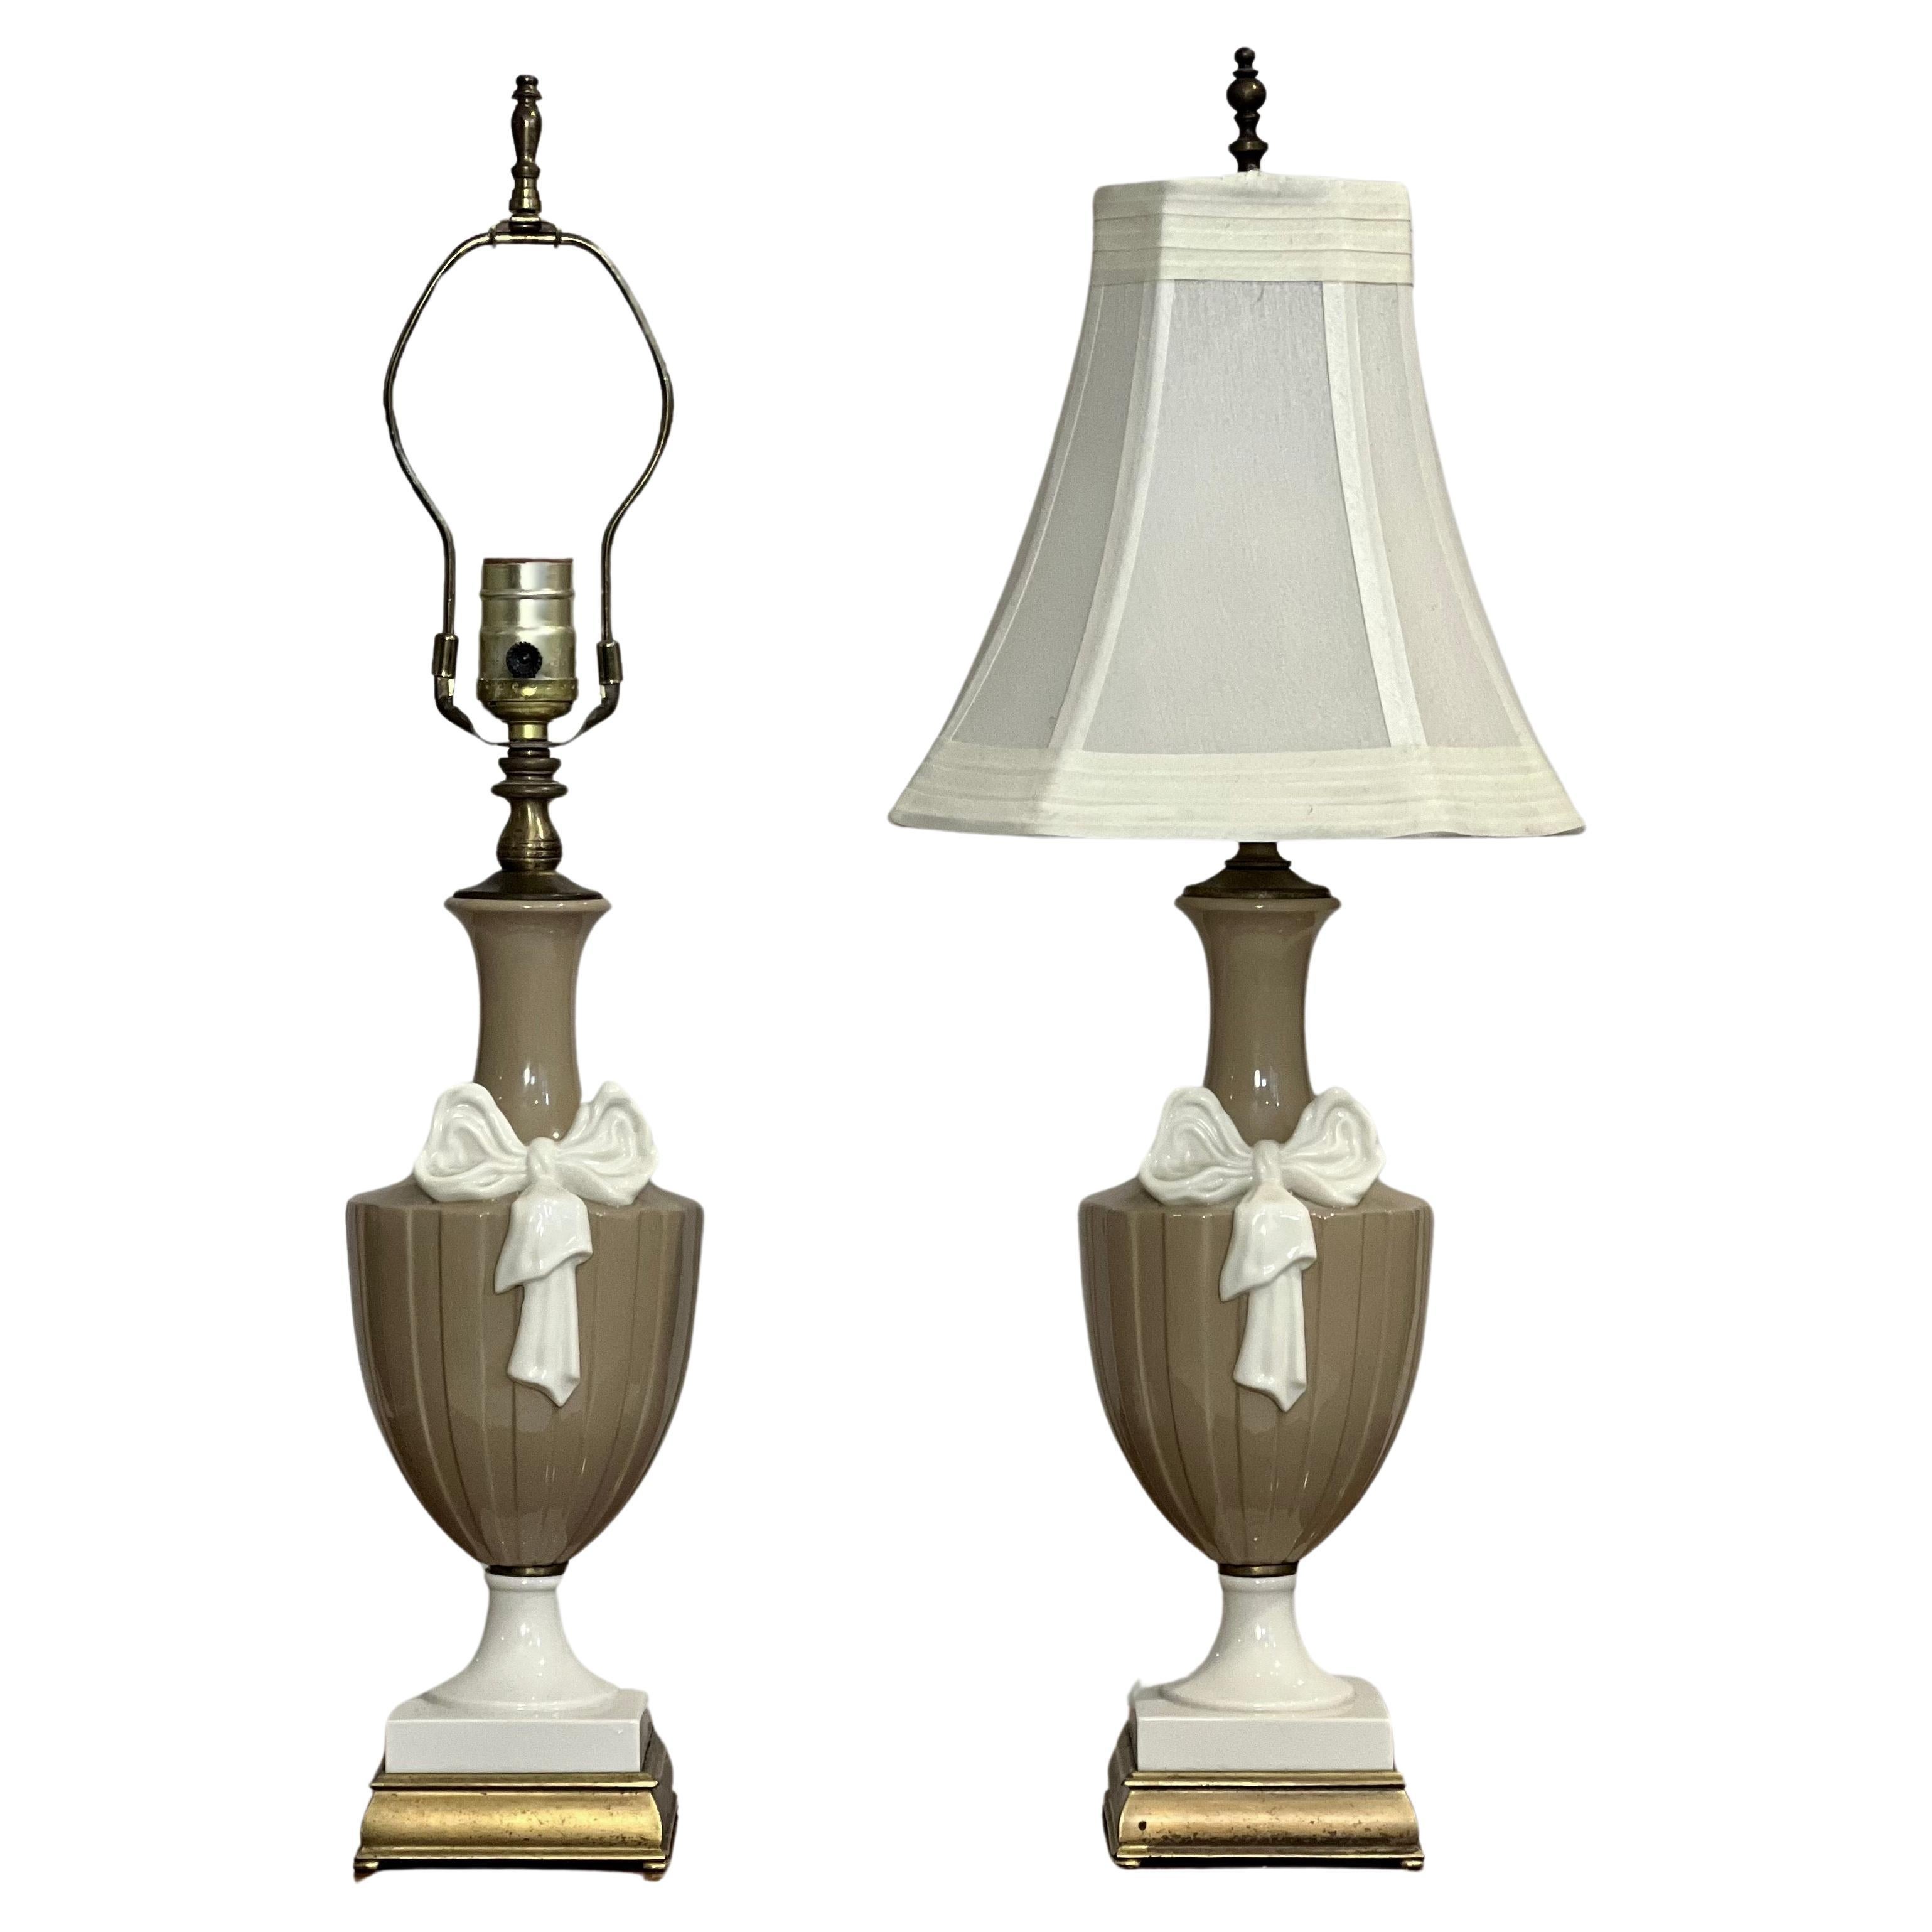 20th Century Lenox Porcelain Lamps in Taupe and White by Dav Art, NY, Pair